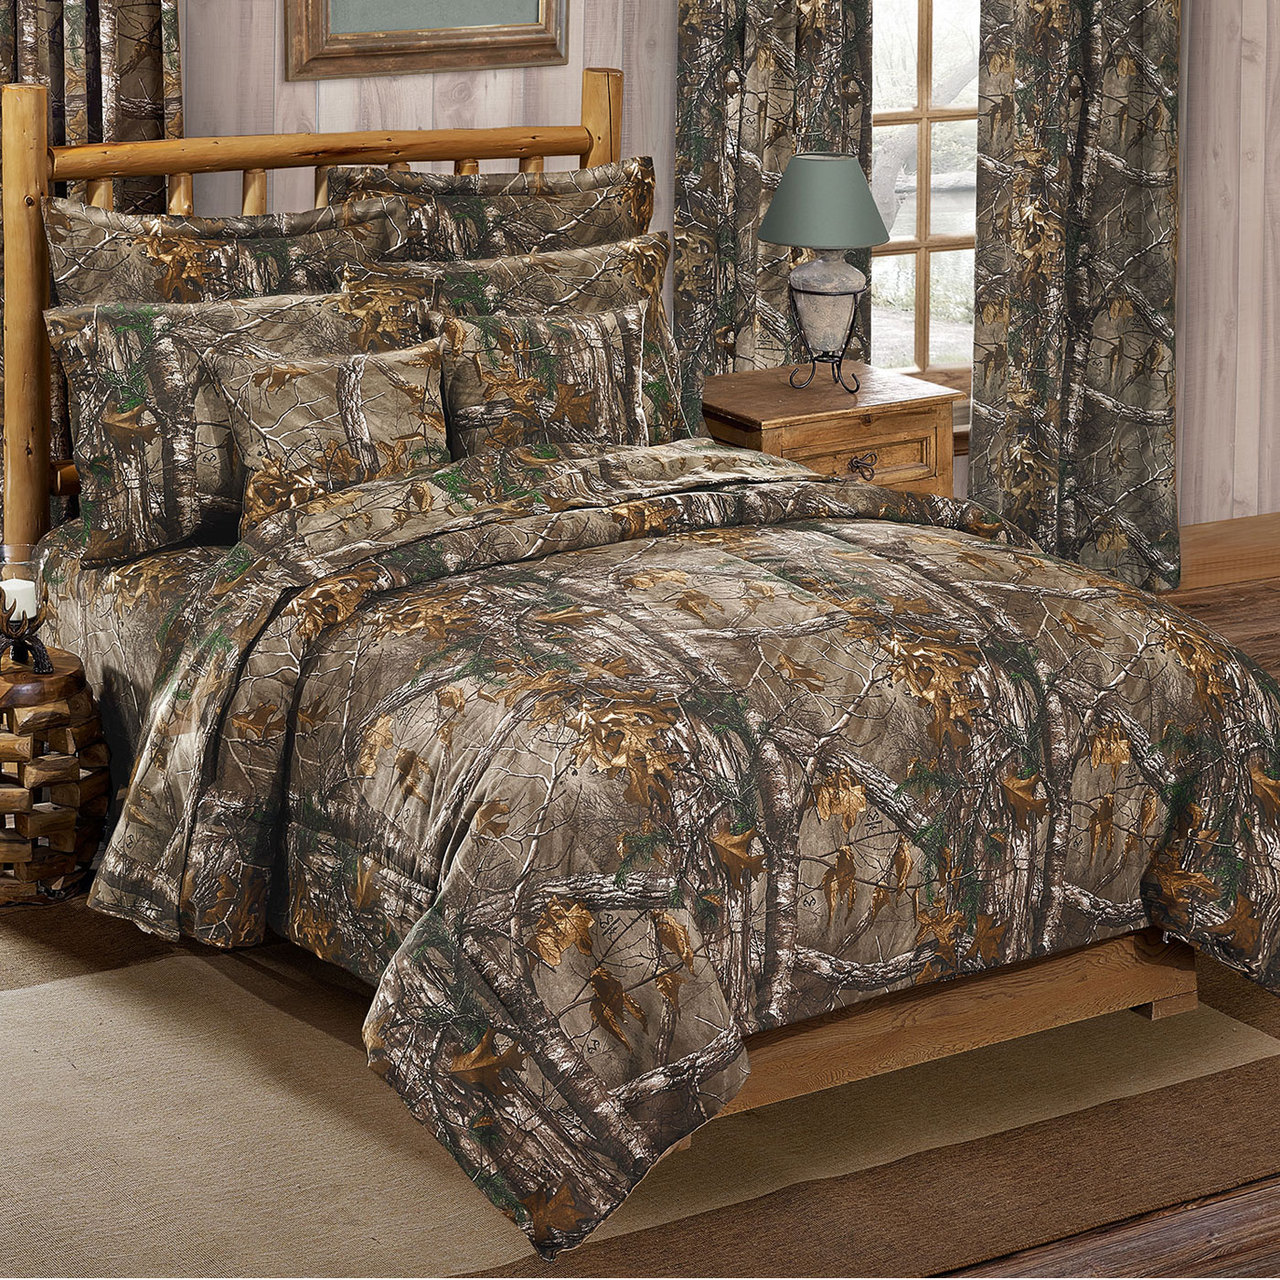 Realtree All Purpose Camo Comforter Set With Sheet and Curtain Option 